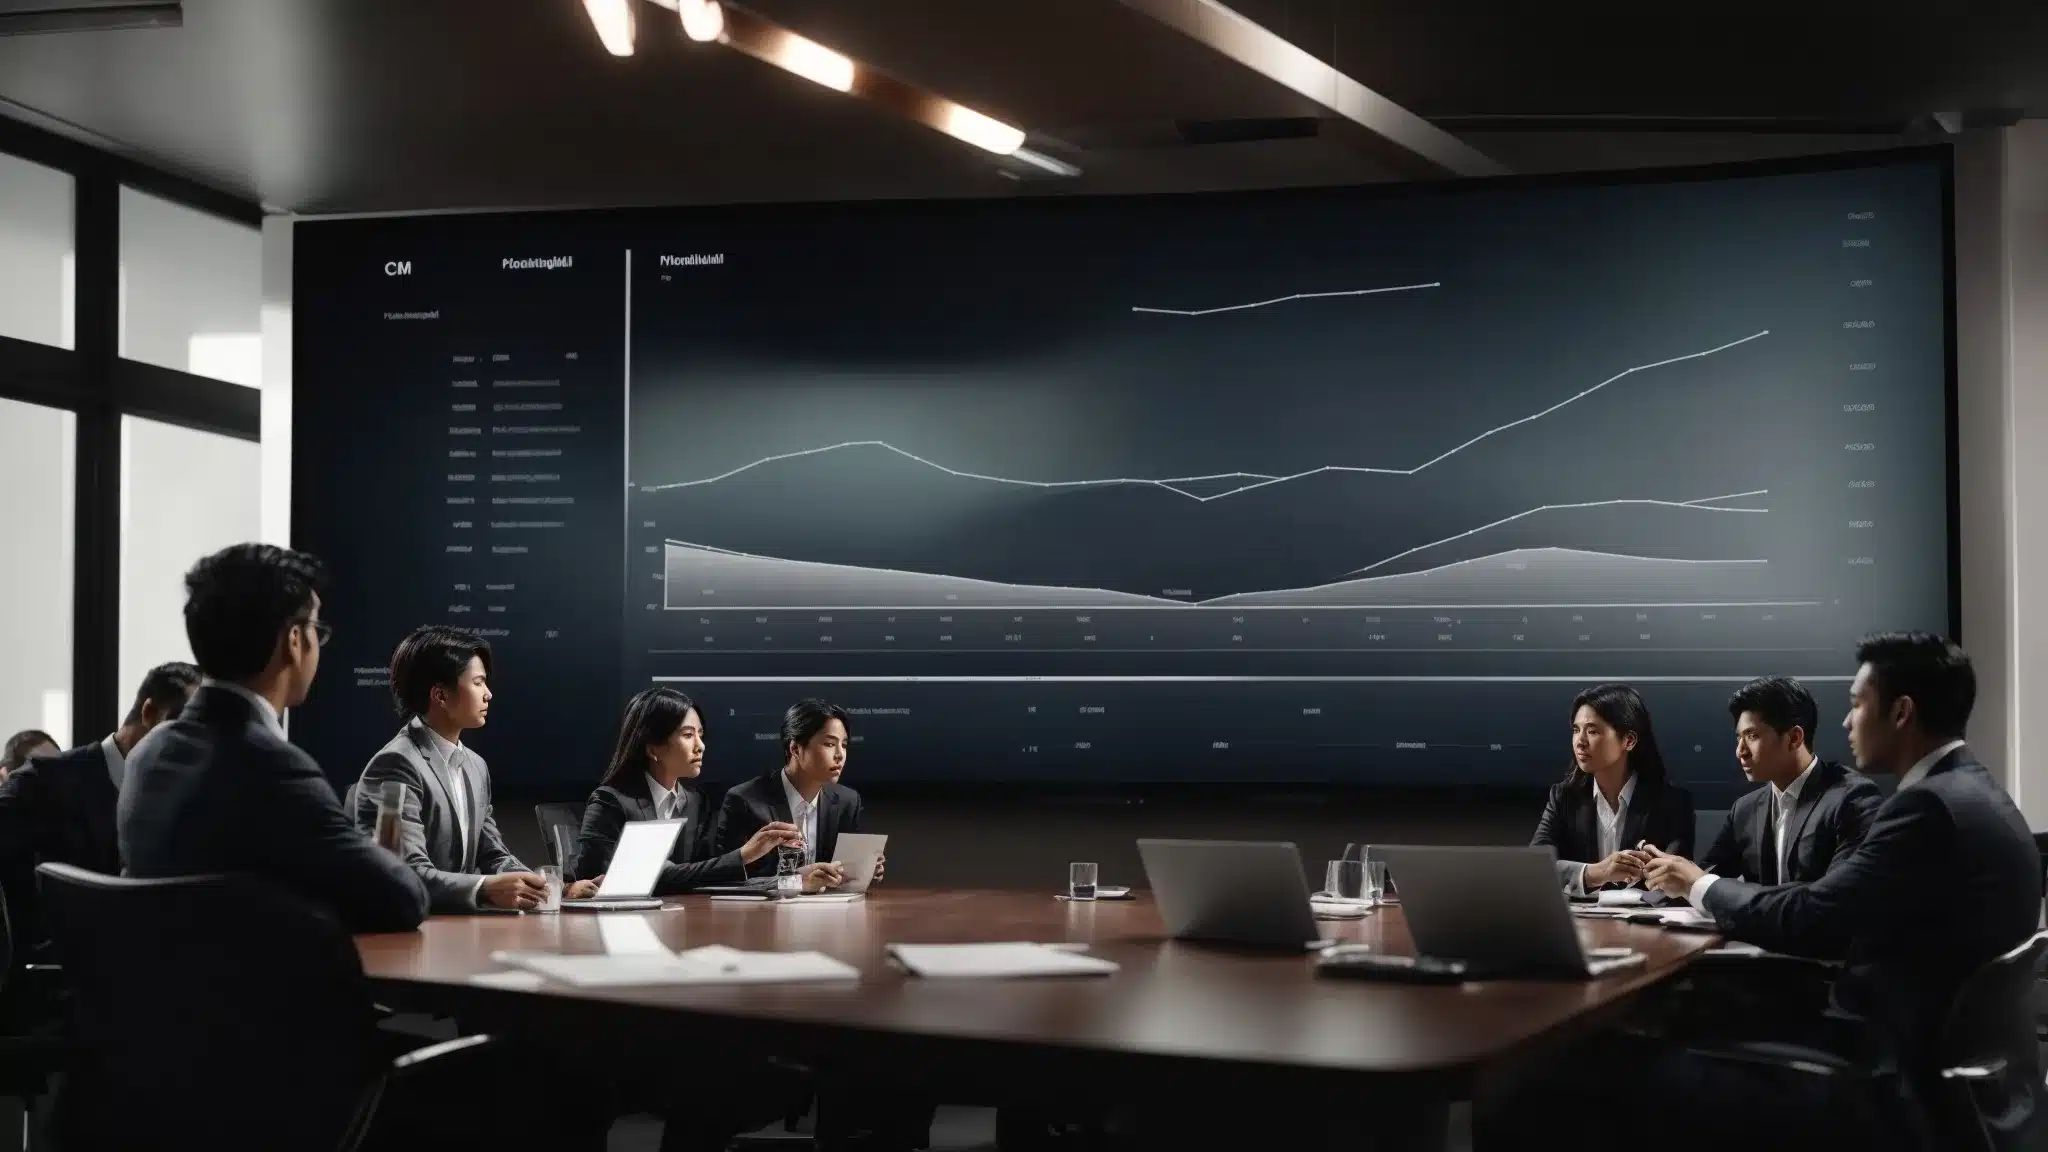 a person confidently presenting analytical charts on a screen during a business meeting, symbolizing strategy optimization through crm technology.